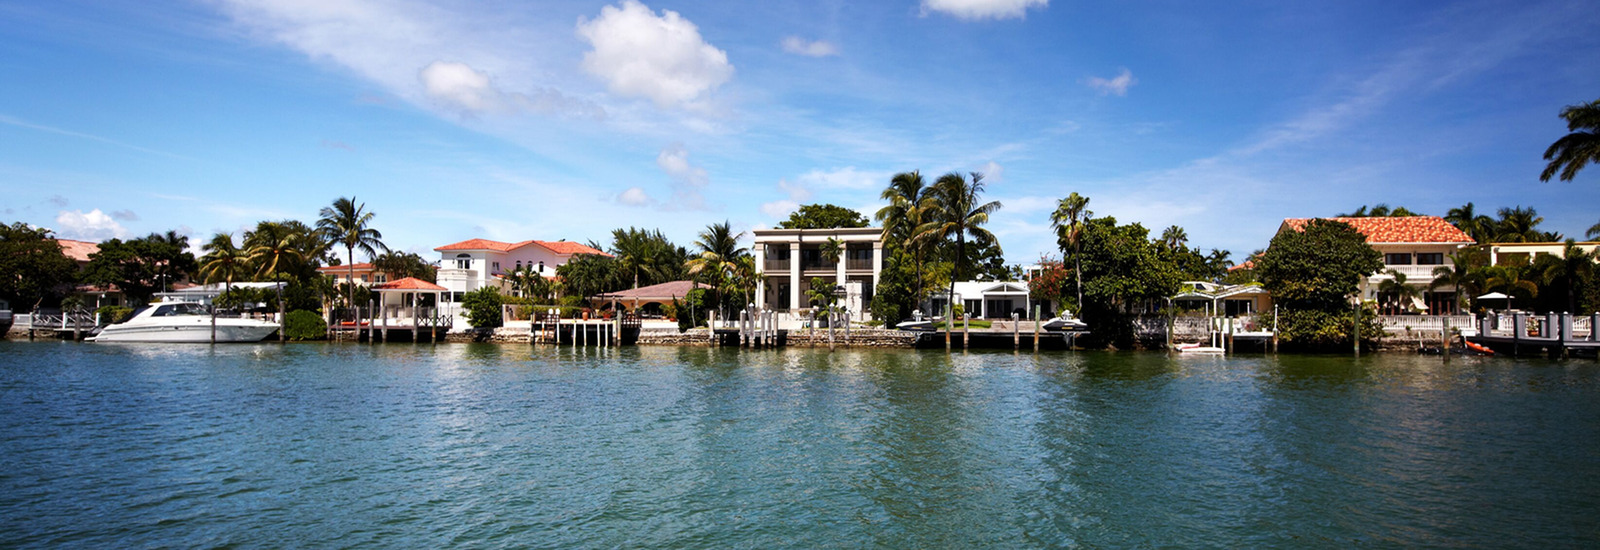 Florida home on a river